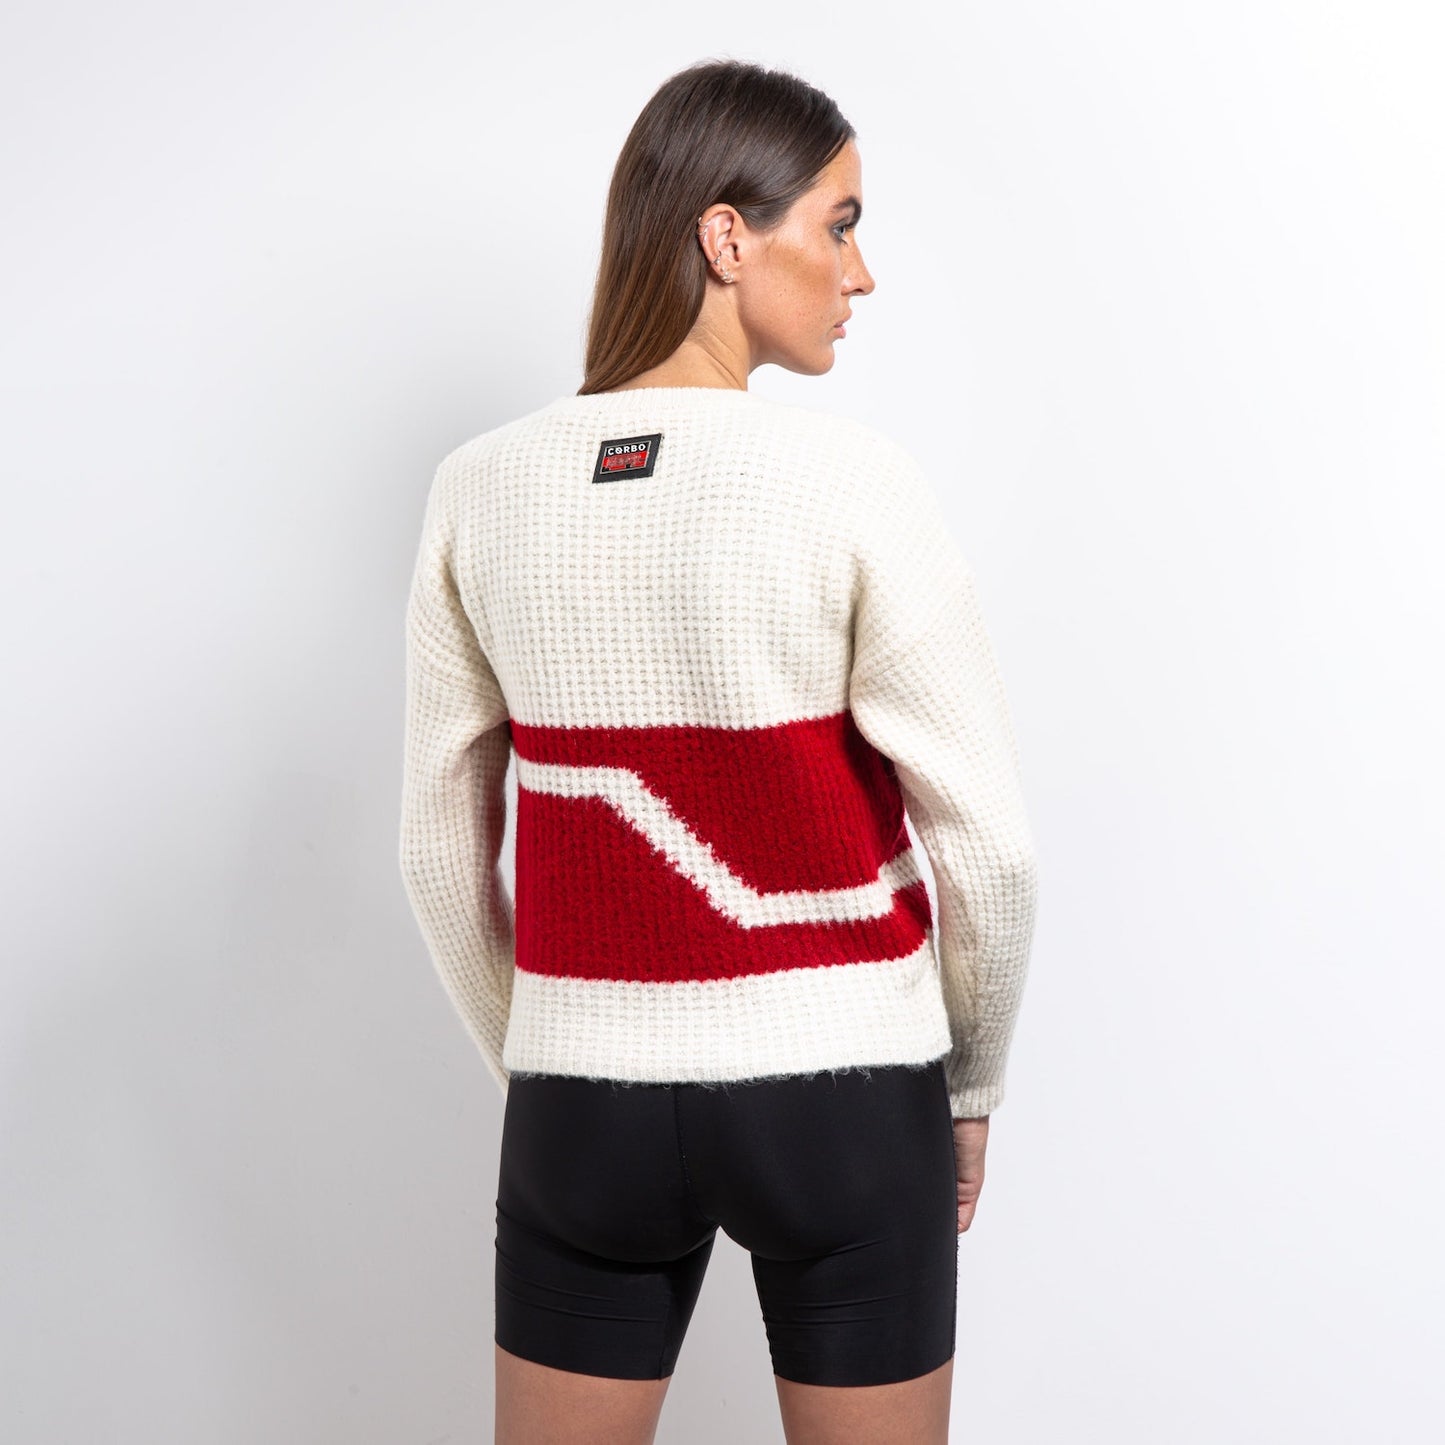 Meteor Cropped Knit Sweater